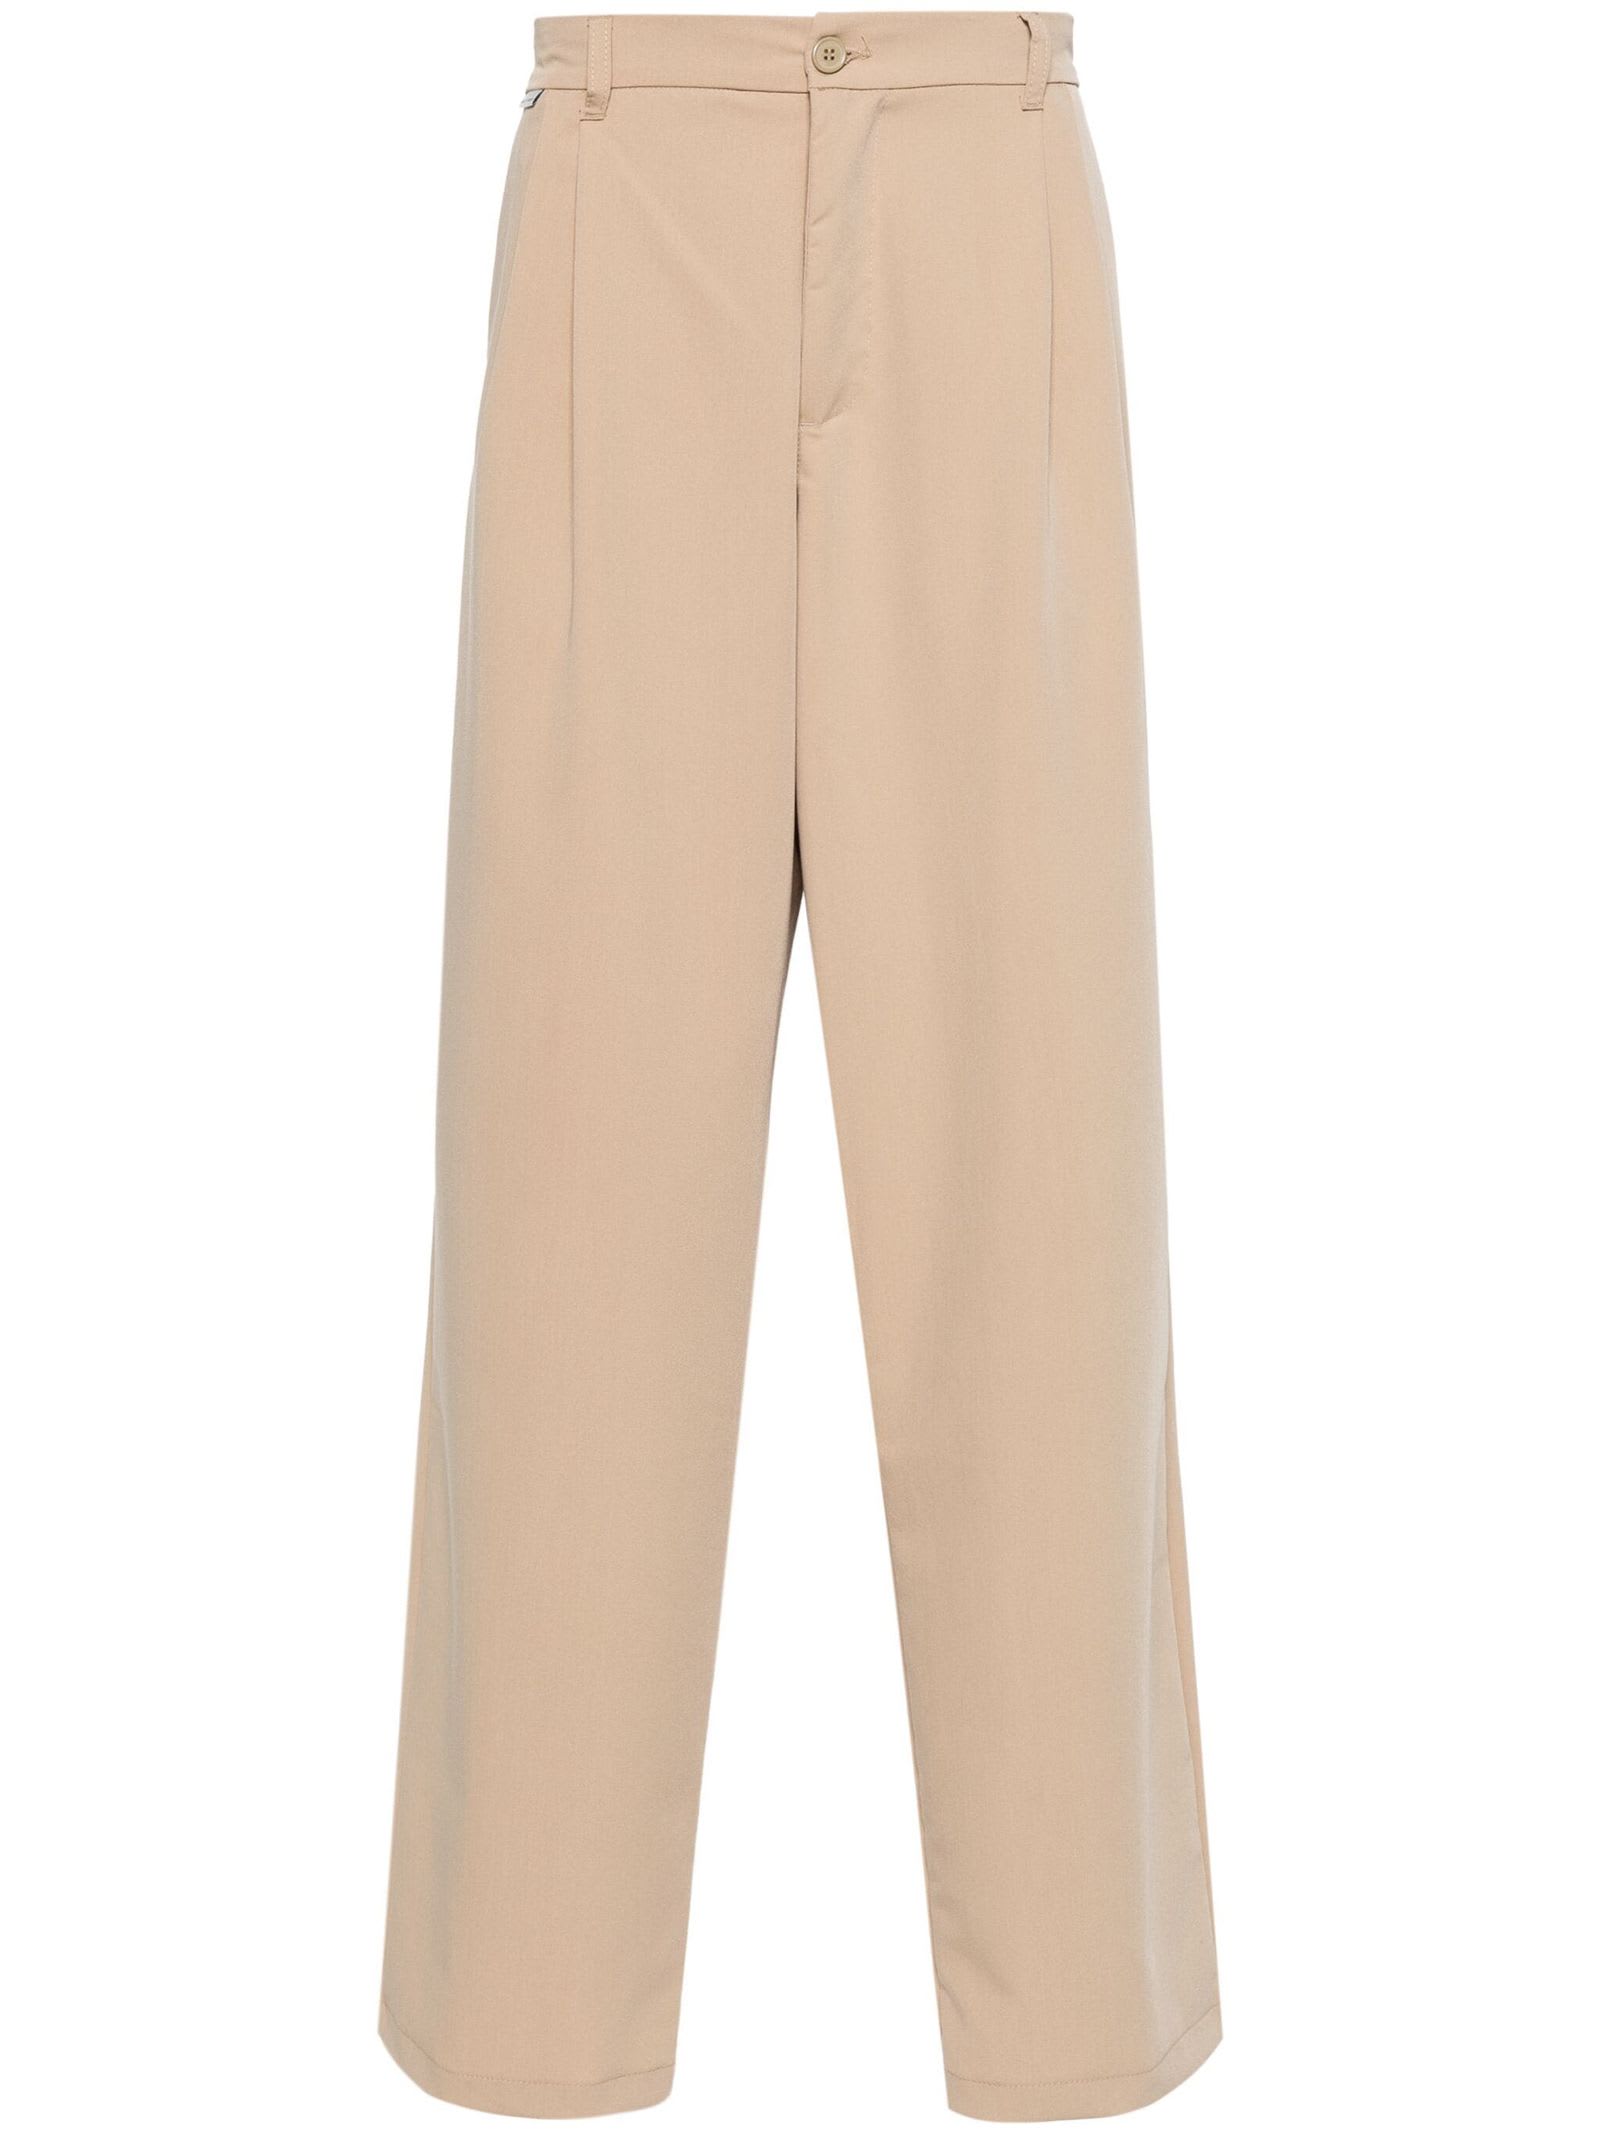 Family First Trousers Beige